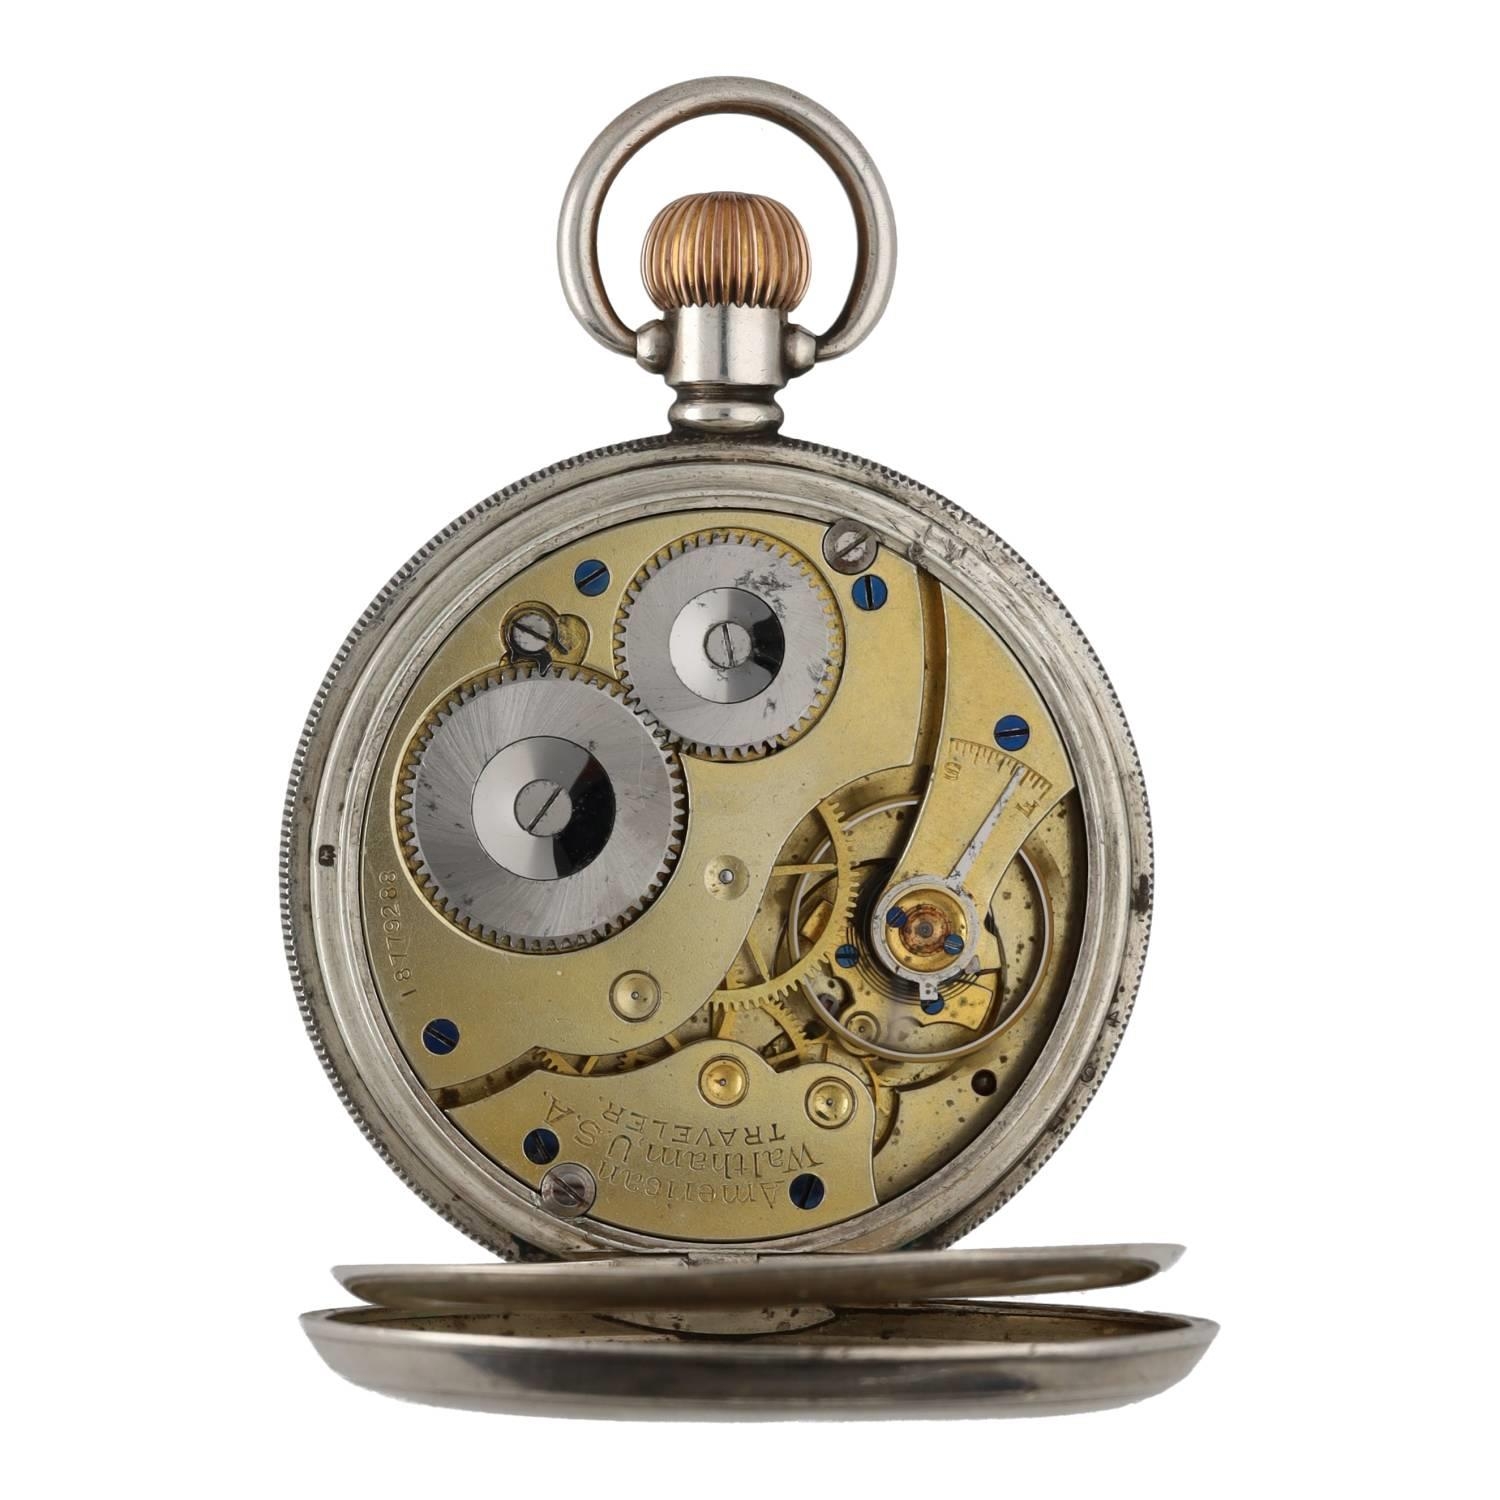 American Waltham 'Traveler' silver lever pocket watch, circa 1912, serial no. 18779288, signed - Image 2 of 3